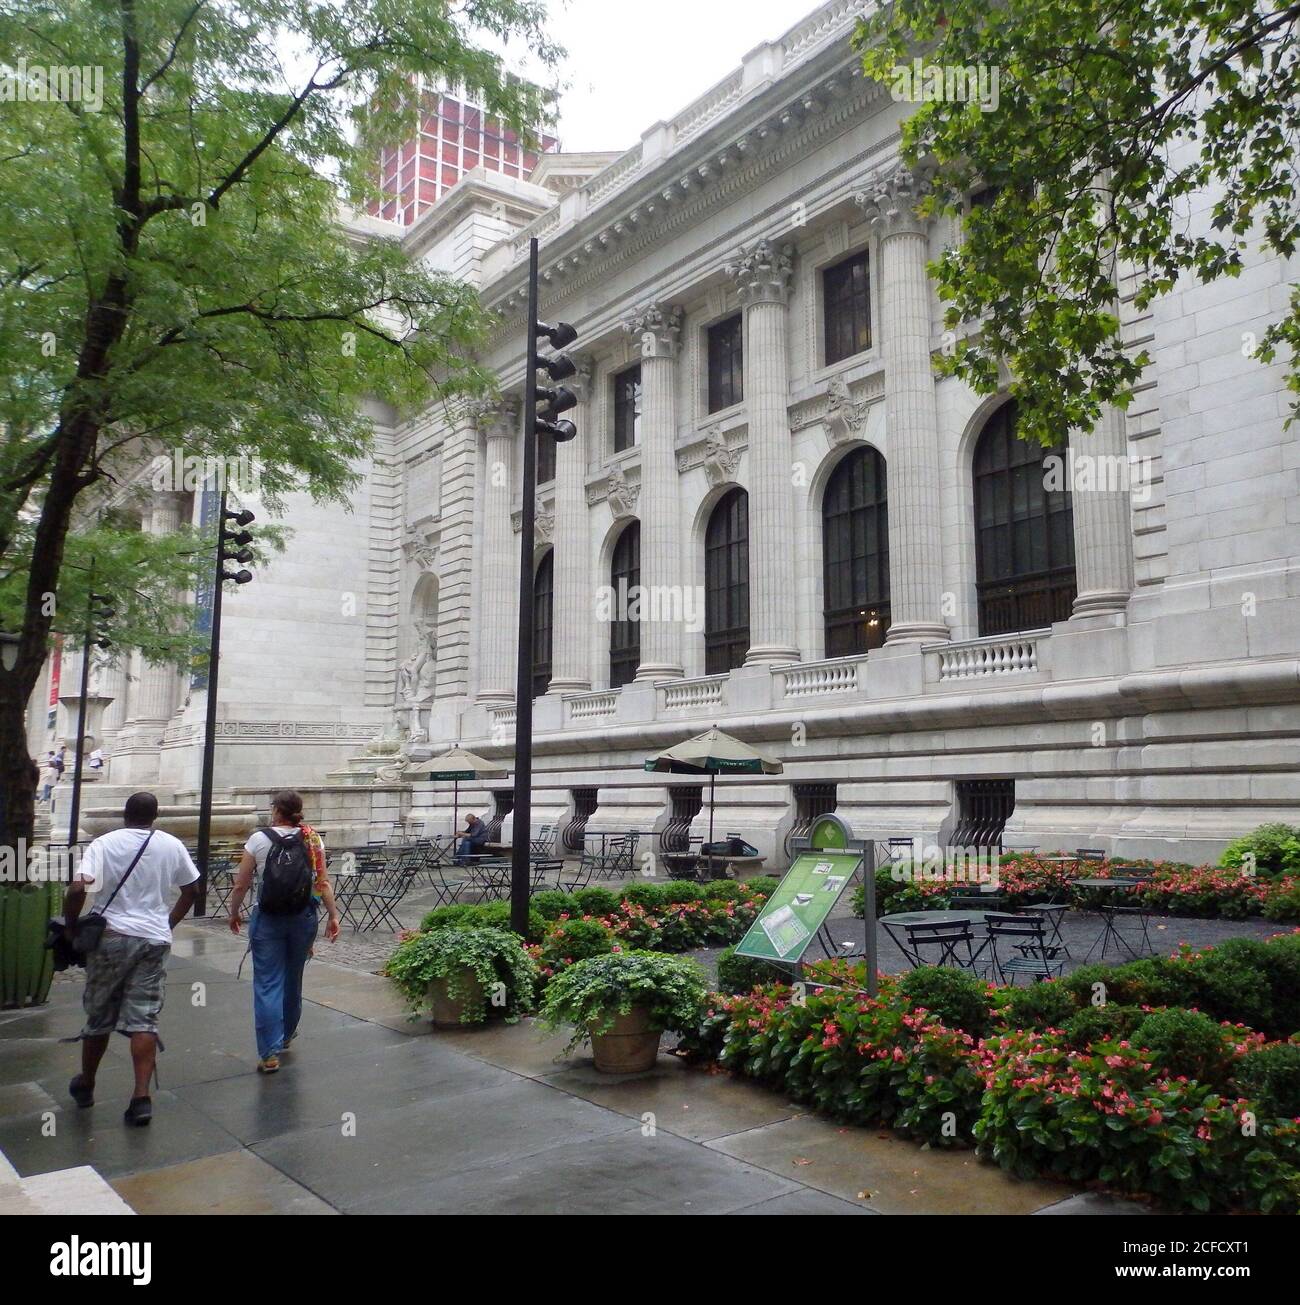 The New York City Public Library building surrounded by green plants and trees, New York City, United States Stock Photo